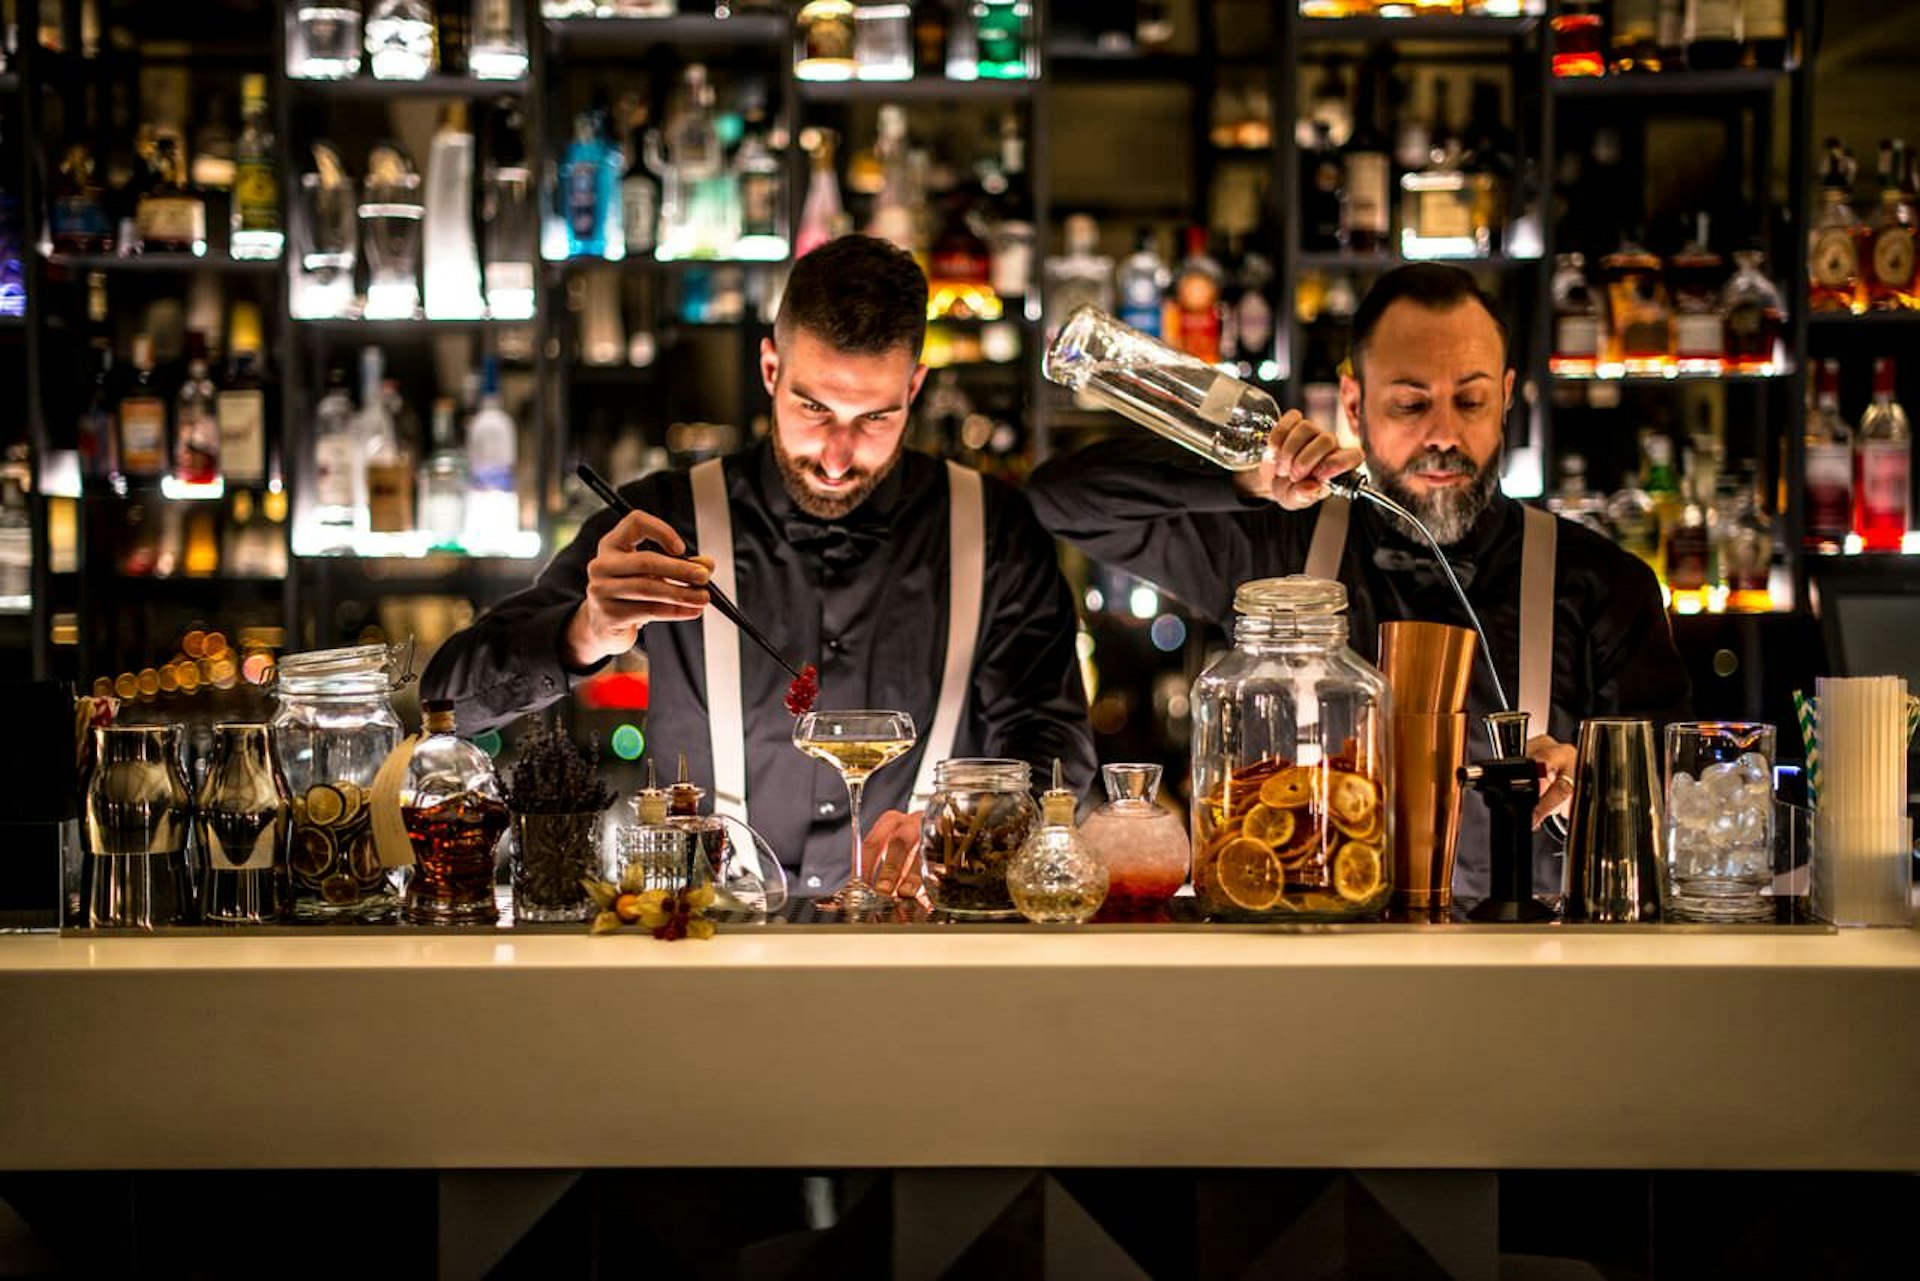 Mixologists attending to their creations